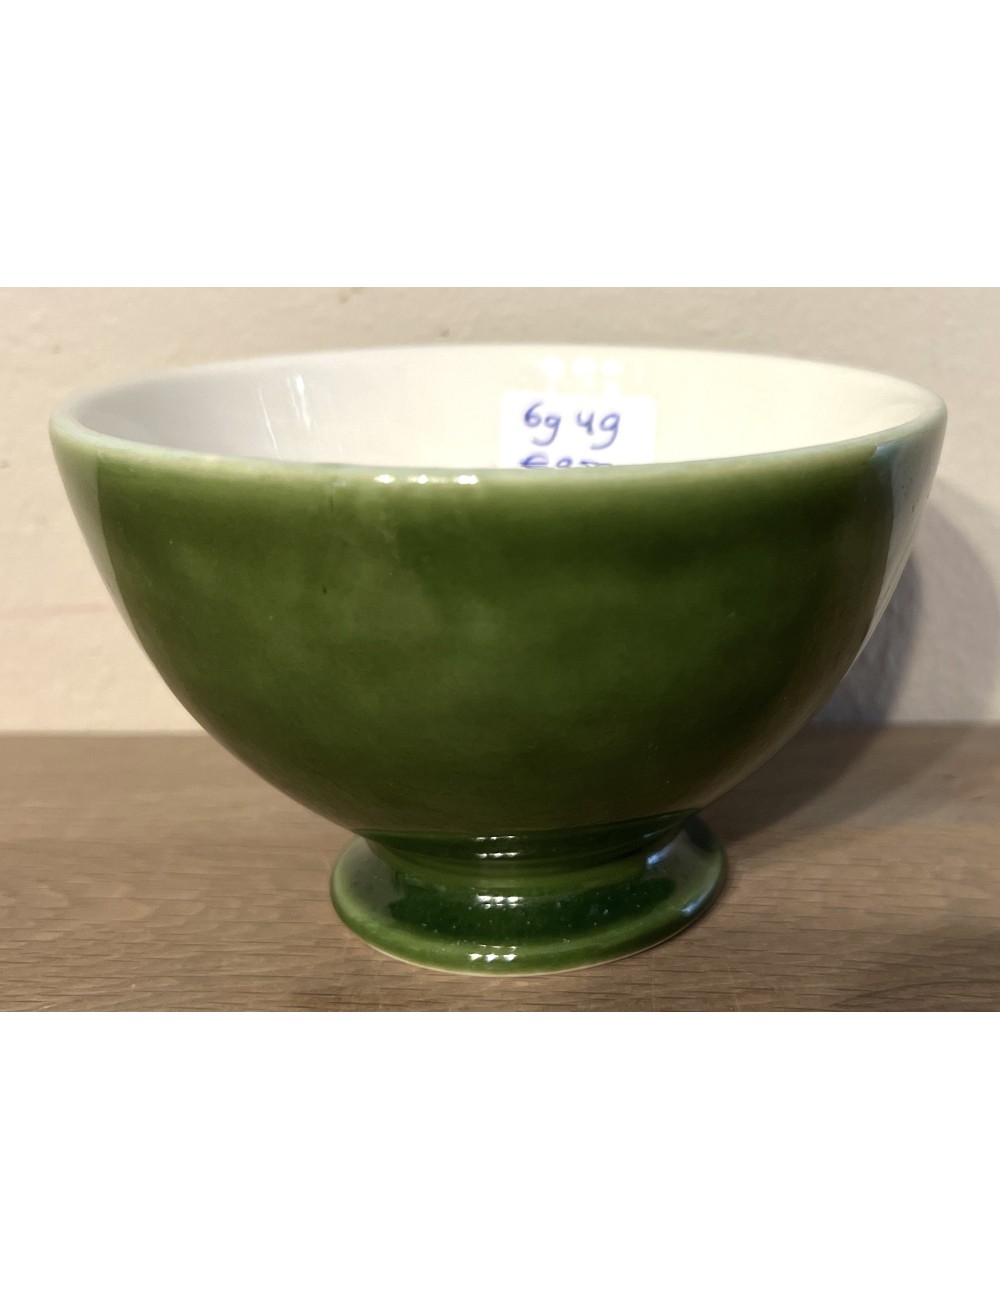 Bowl - unmarked but Boch (blind mark O) - executed in dark green color